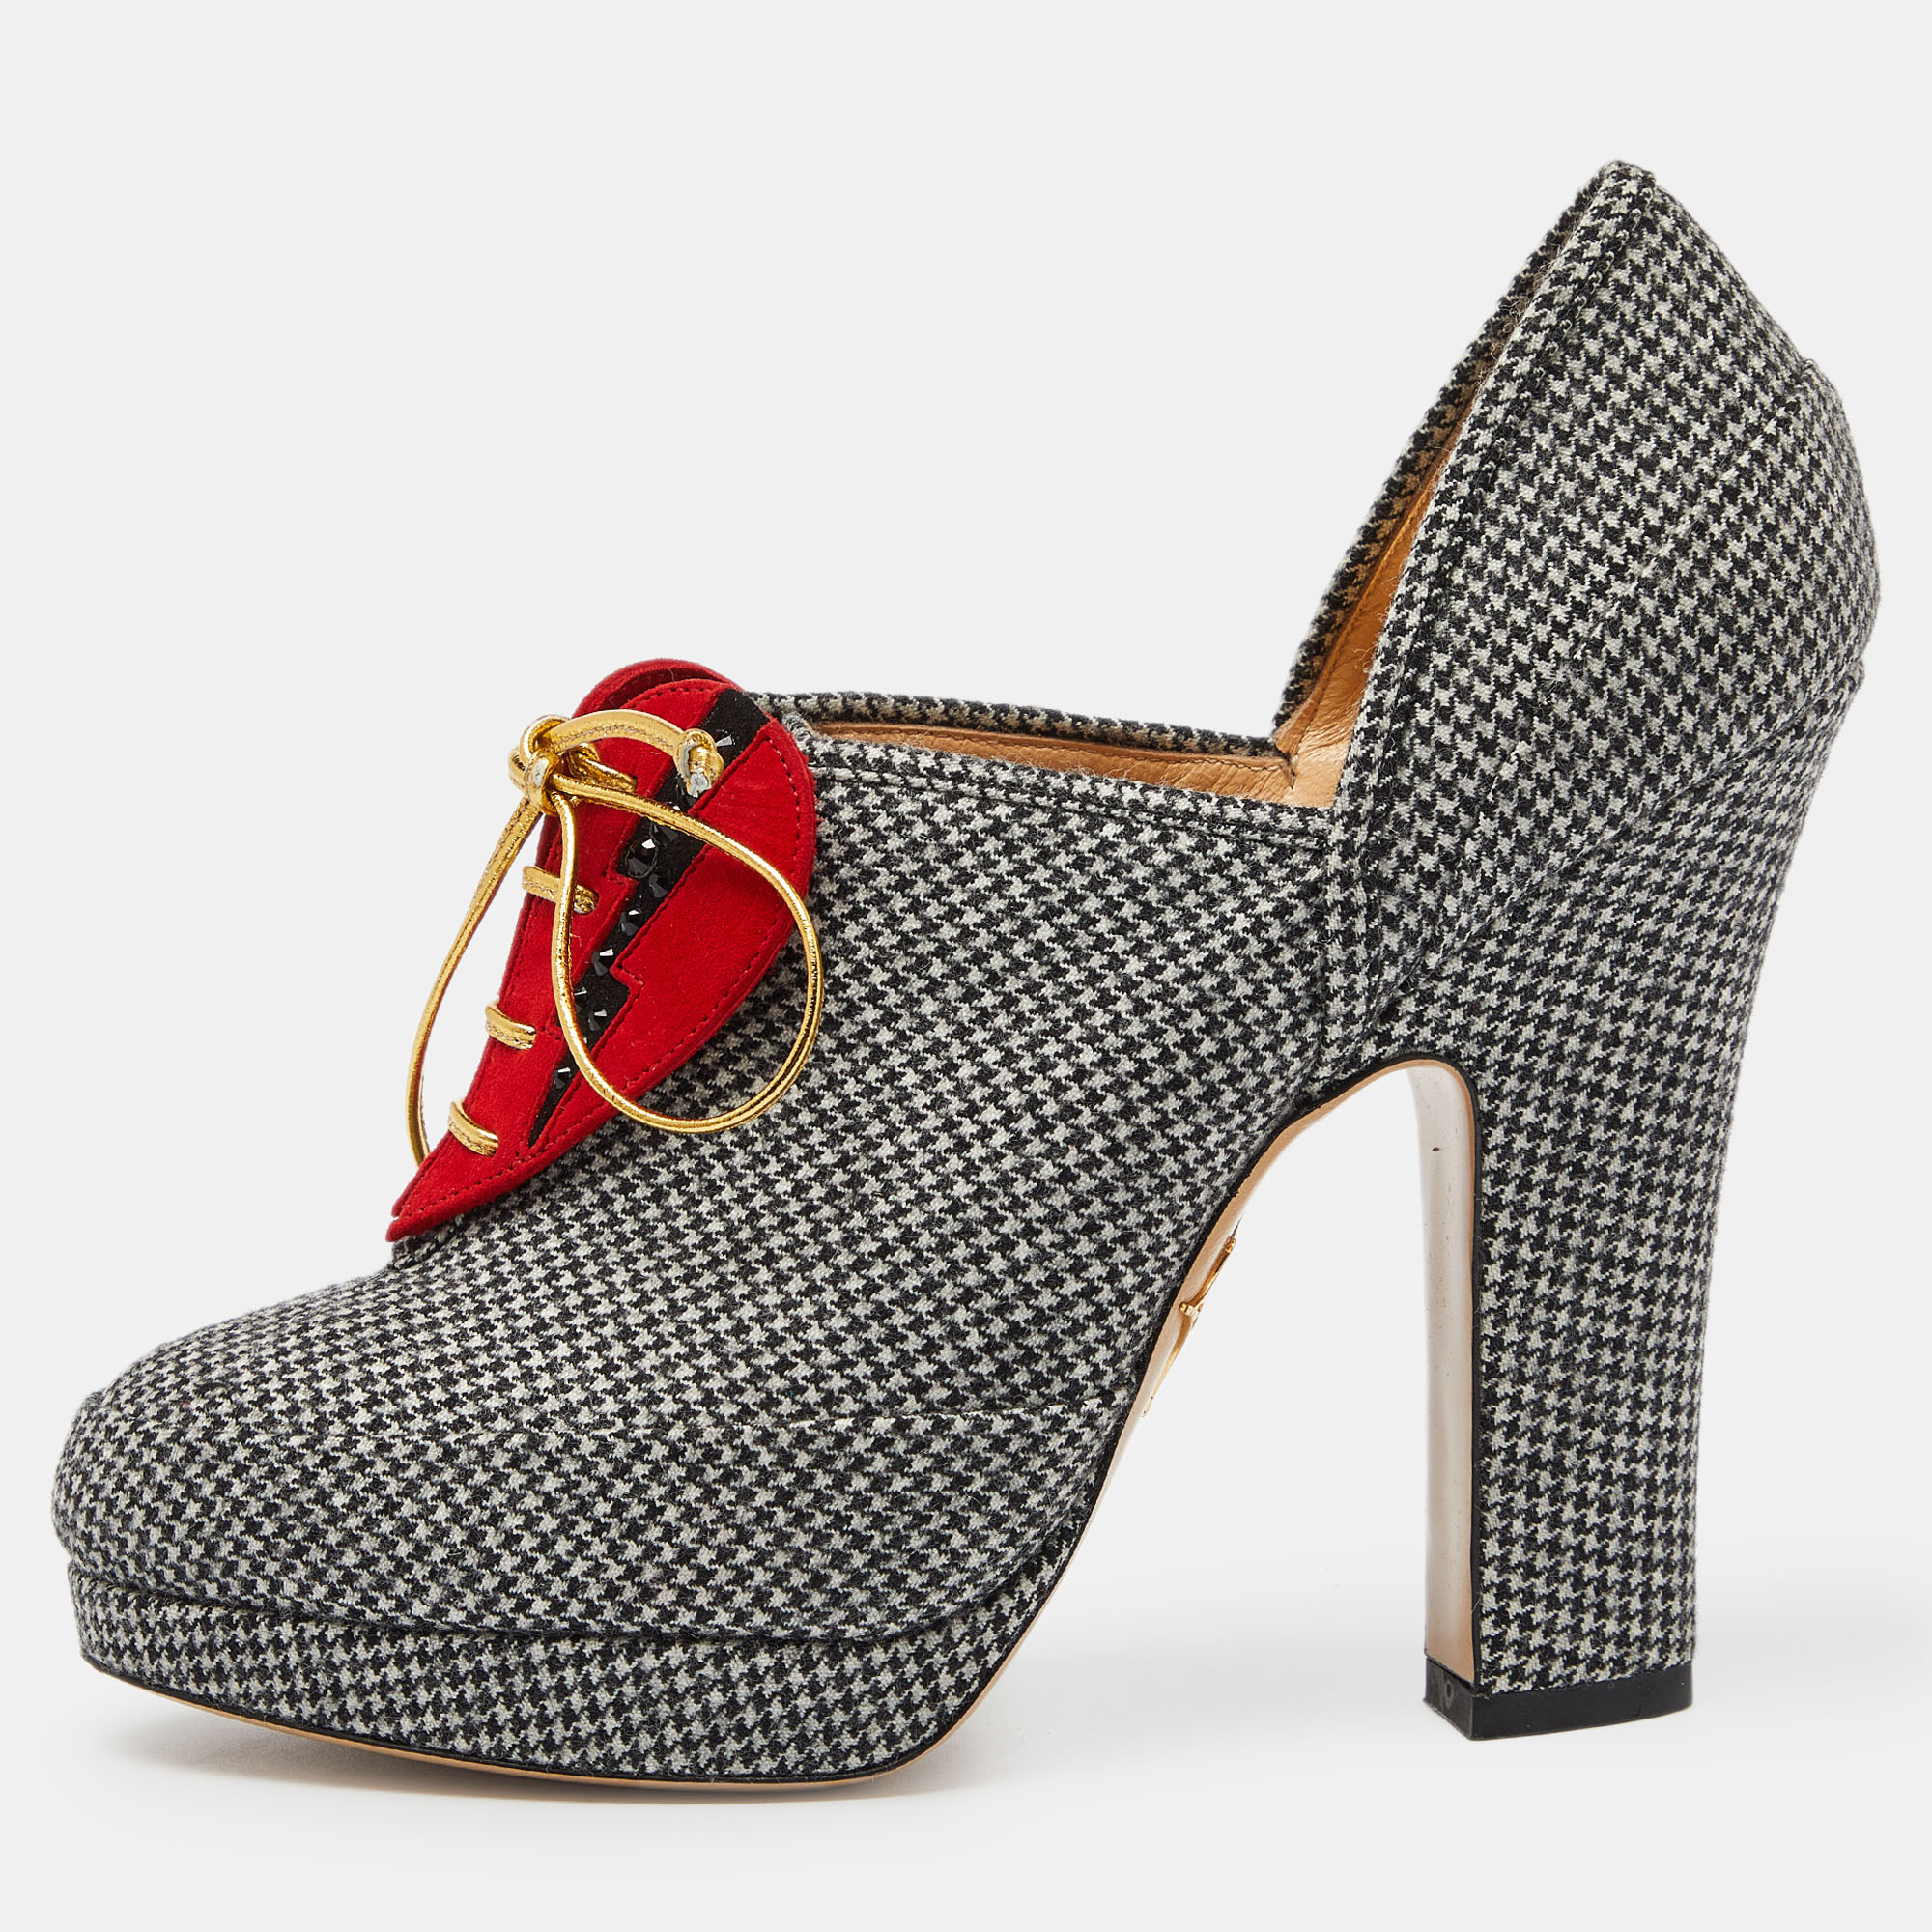 Charlotte olympia grey/red canvas and suede ankle booties size 38.5